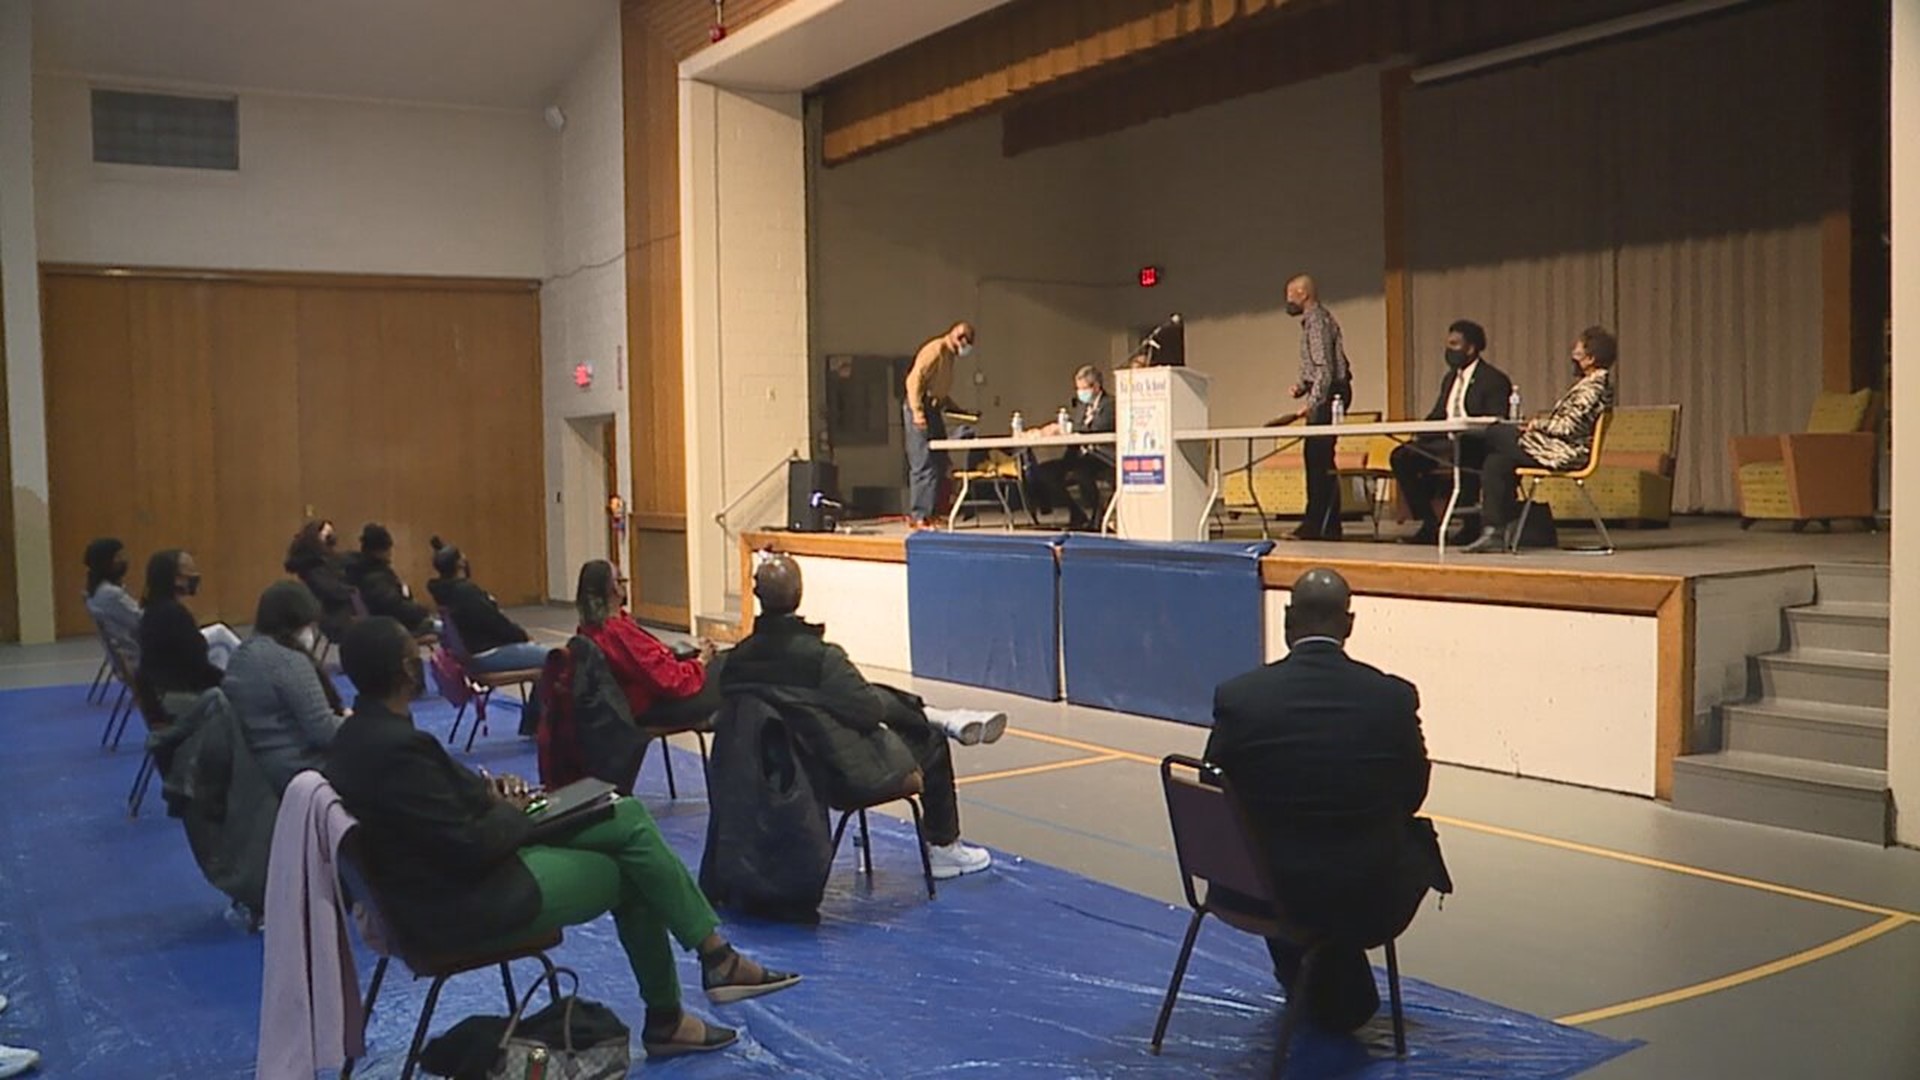 Members of the community met at The Nativity School of Harrisburg to discuss the ongoing gun violence crisis in the city.